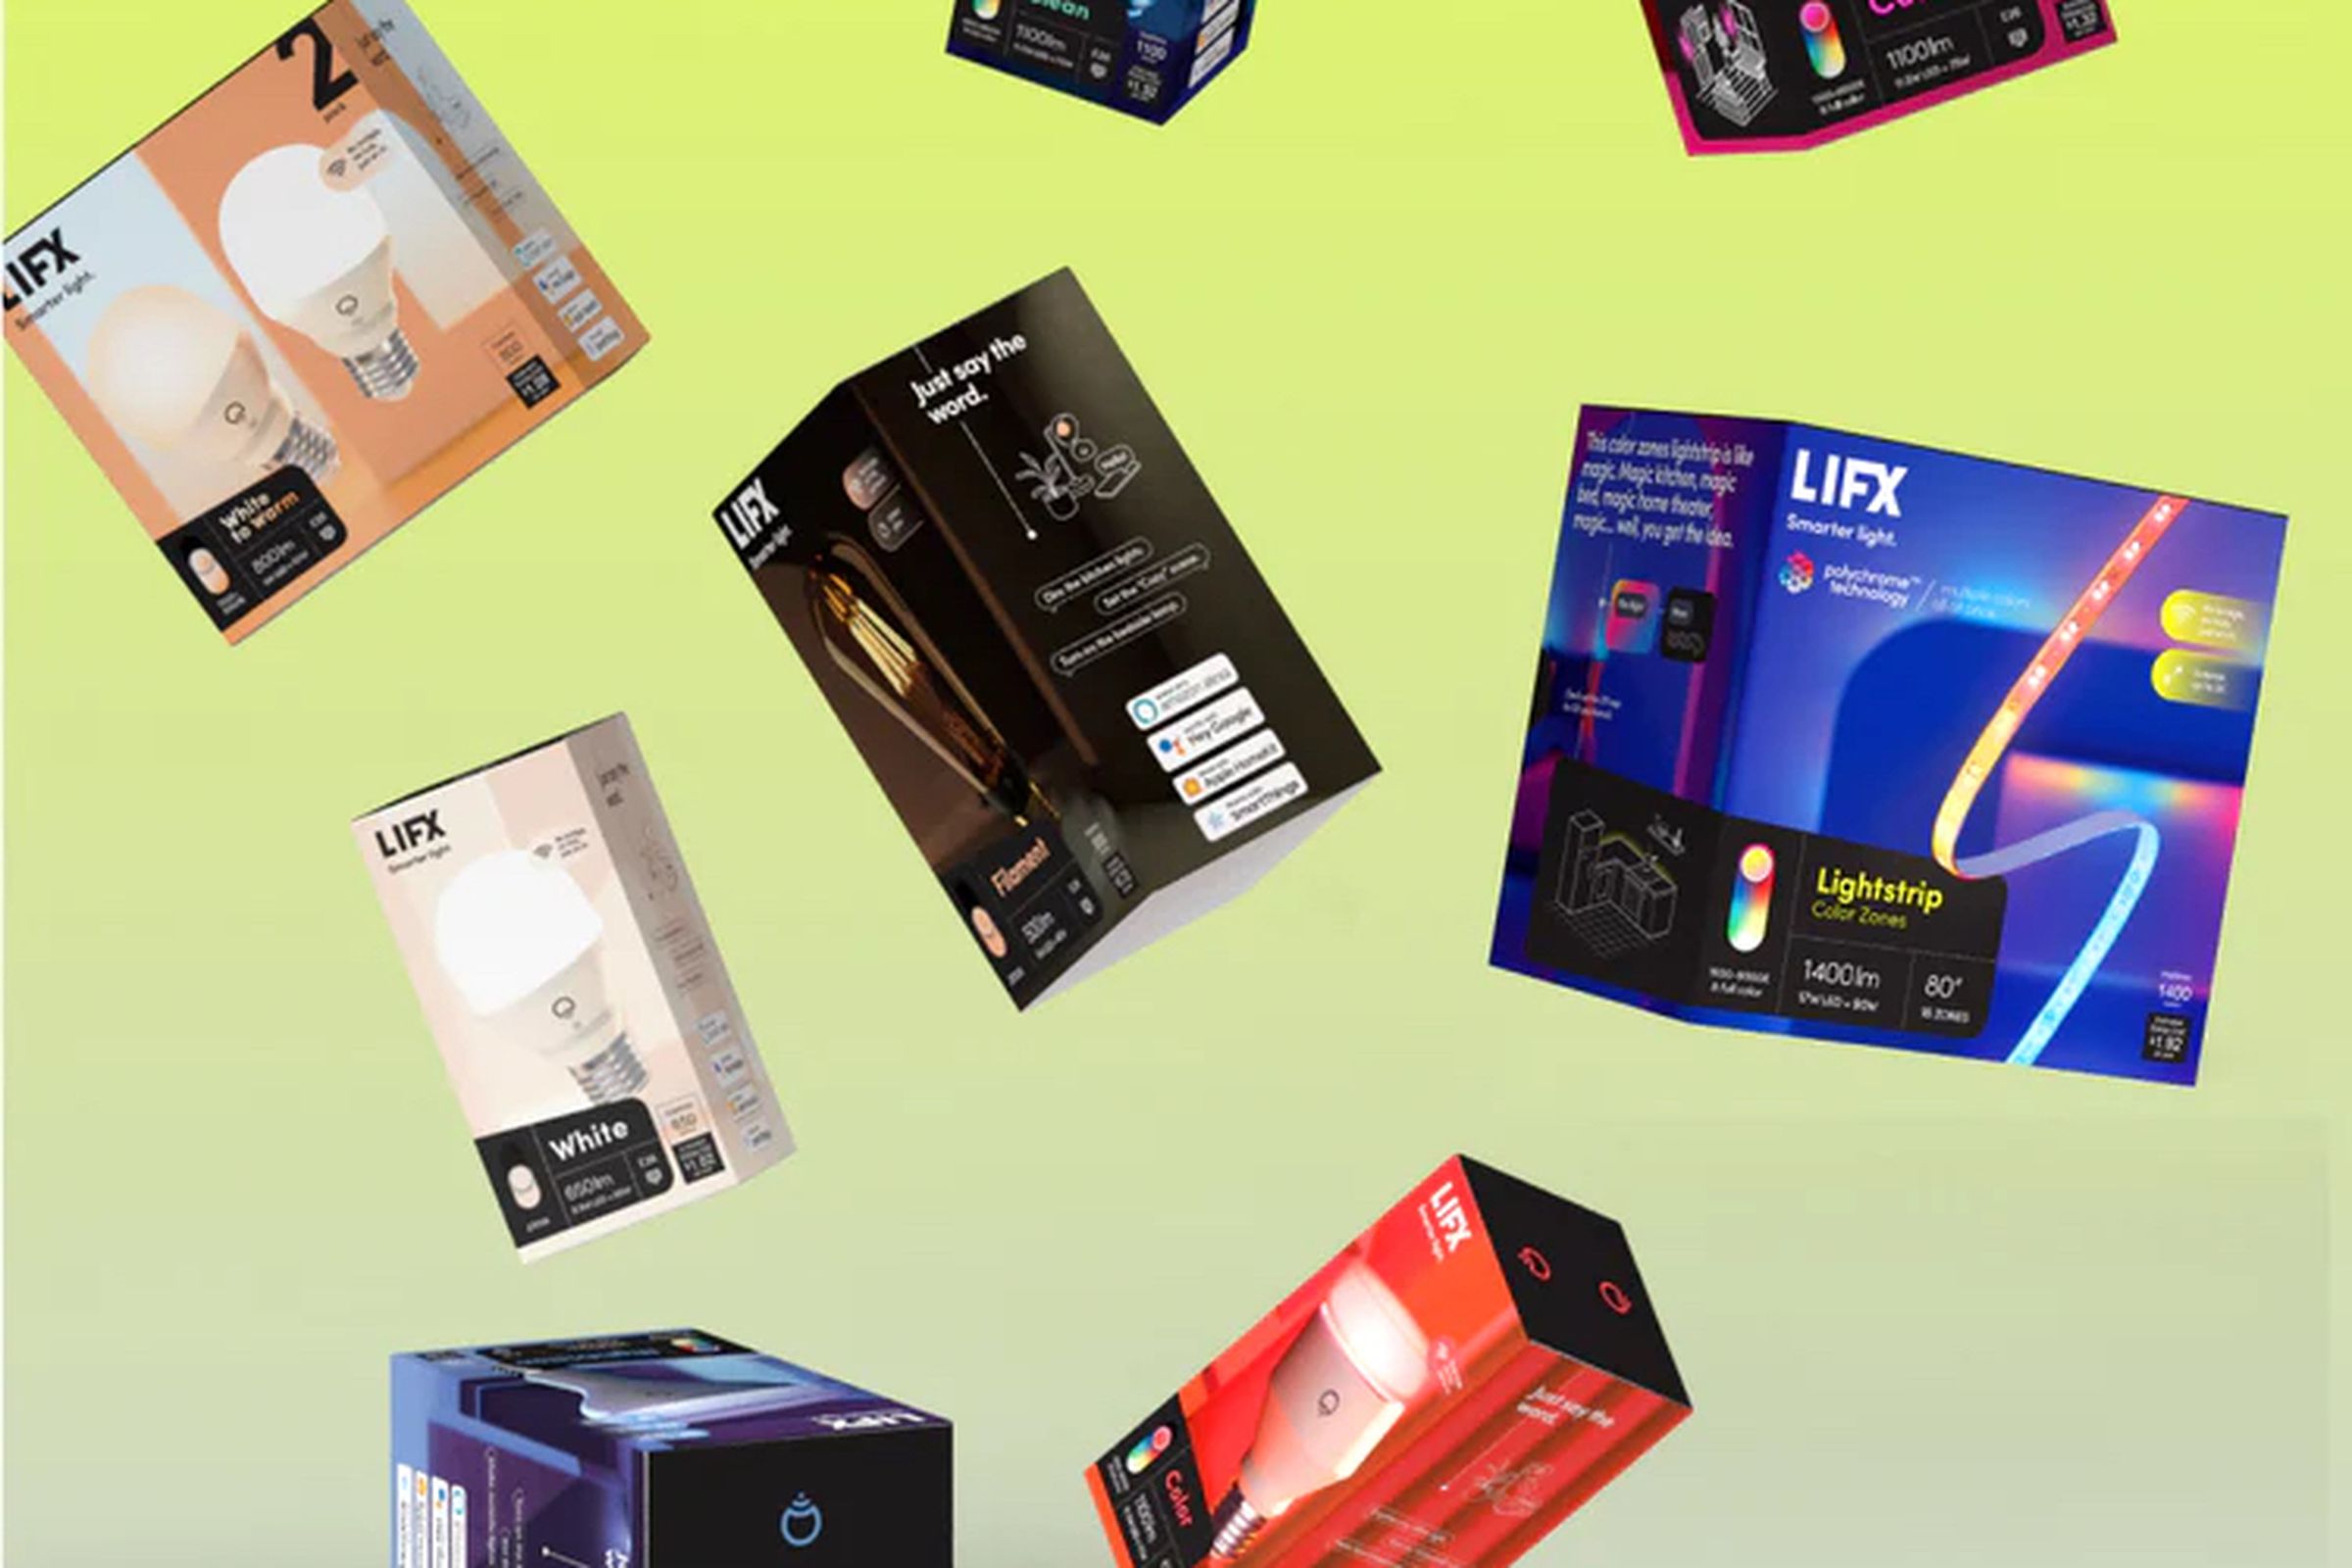 Smart lighting company LIFX has been bought by Feit Electric.